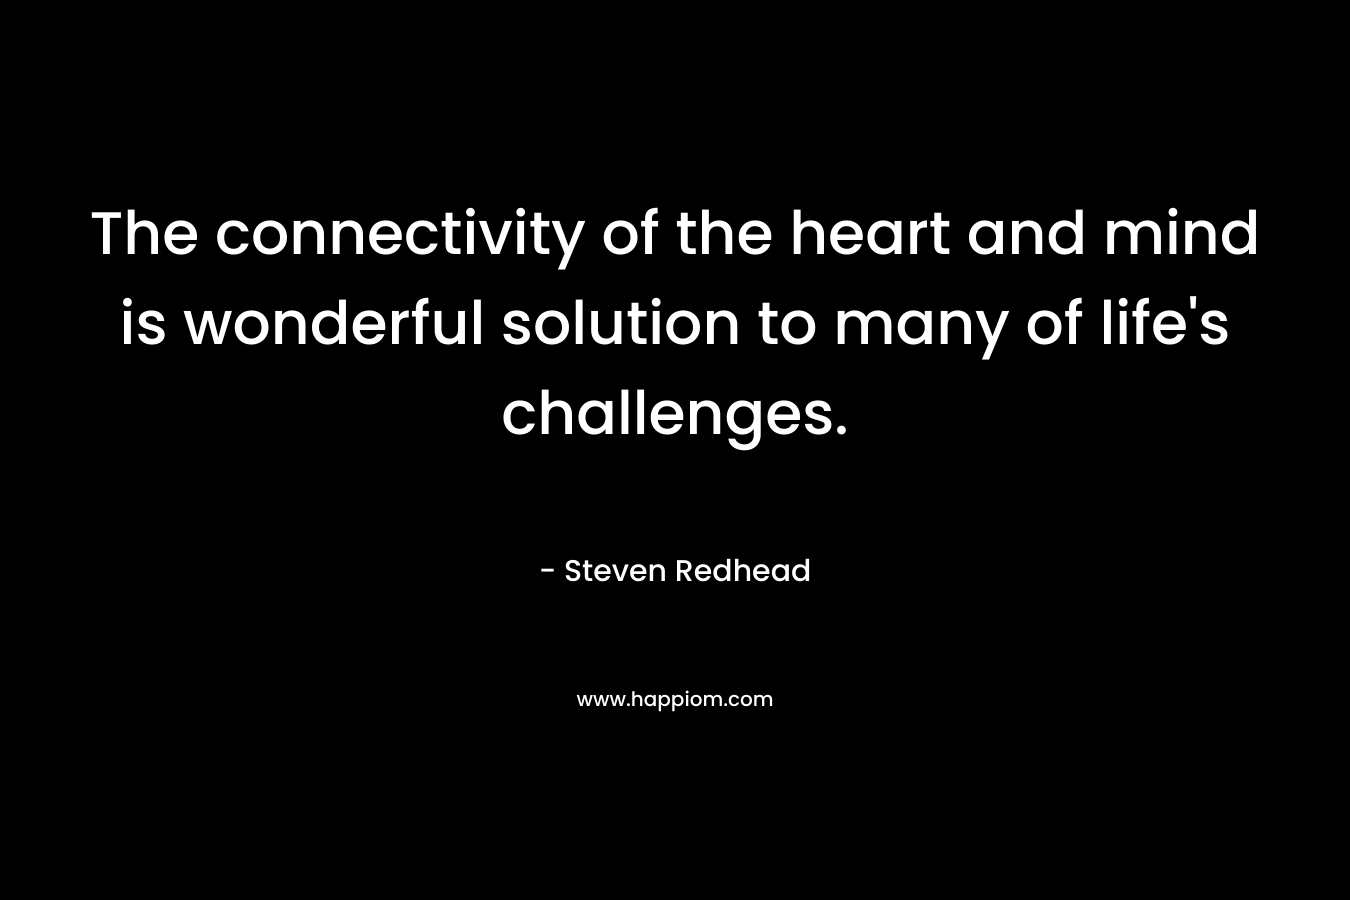 The connectivity of the heart and mind is wonderful solution to many of life's challenges.